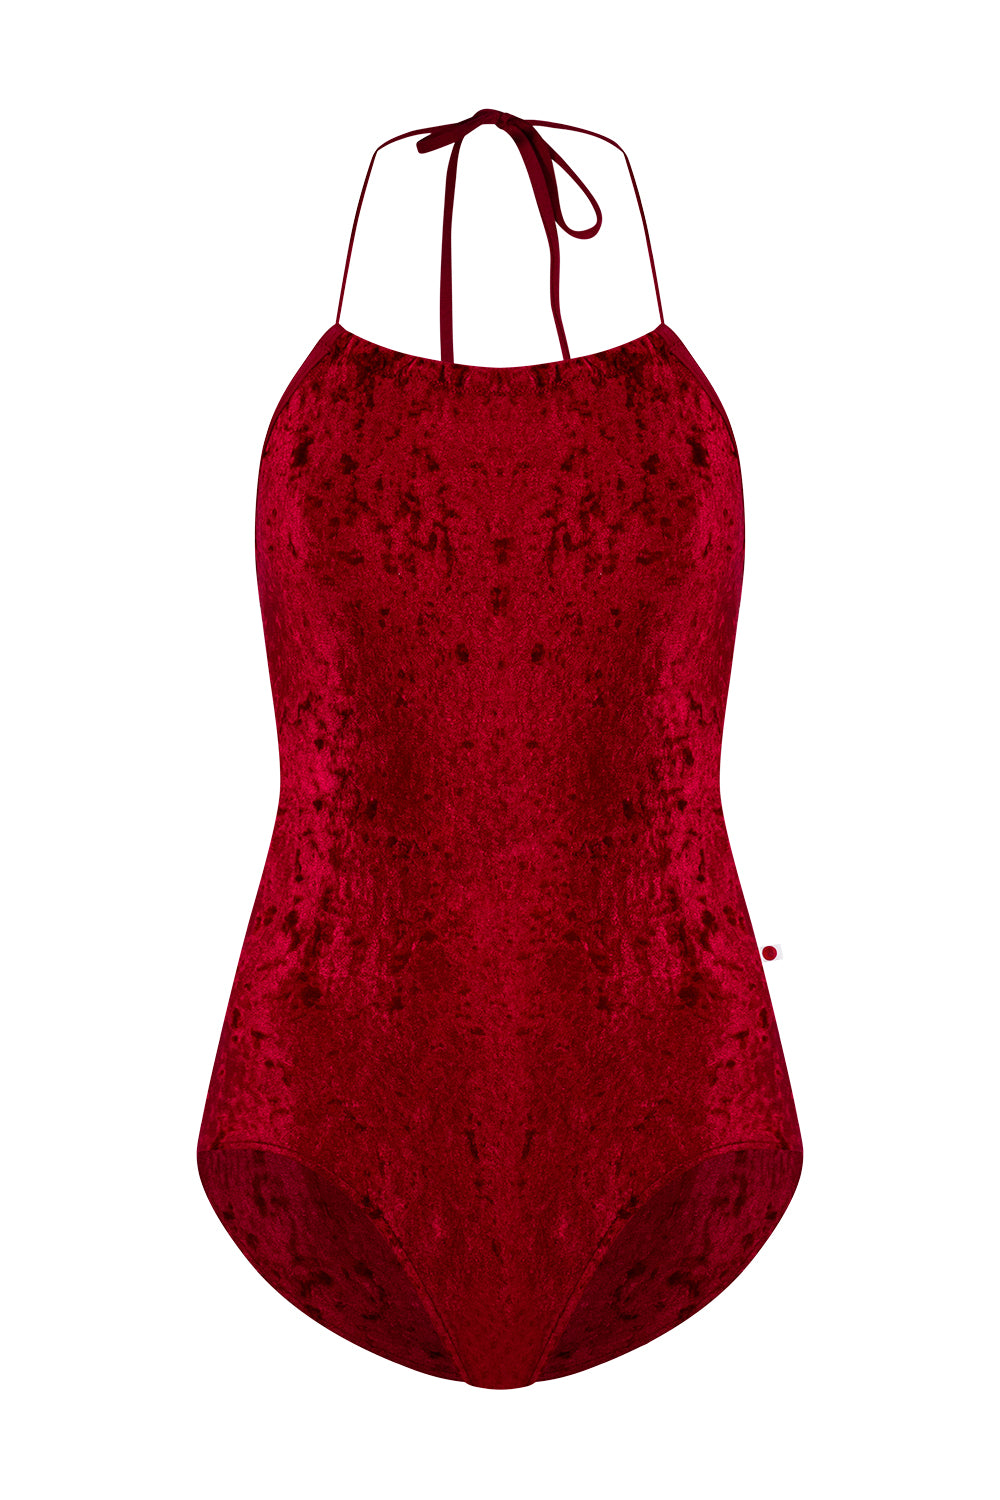 Monique leotard in CV-Dark Red body color and N-Berry trim color